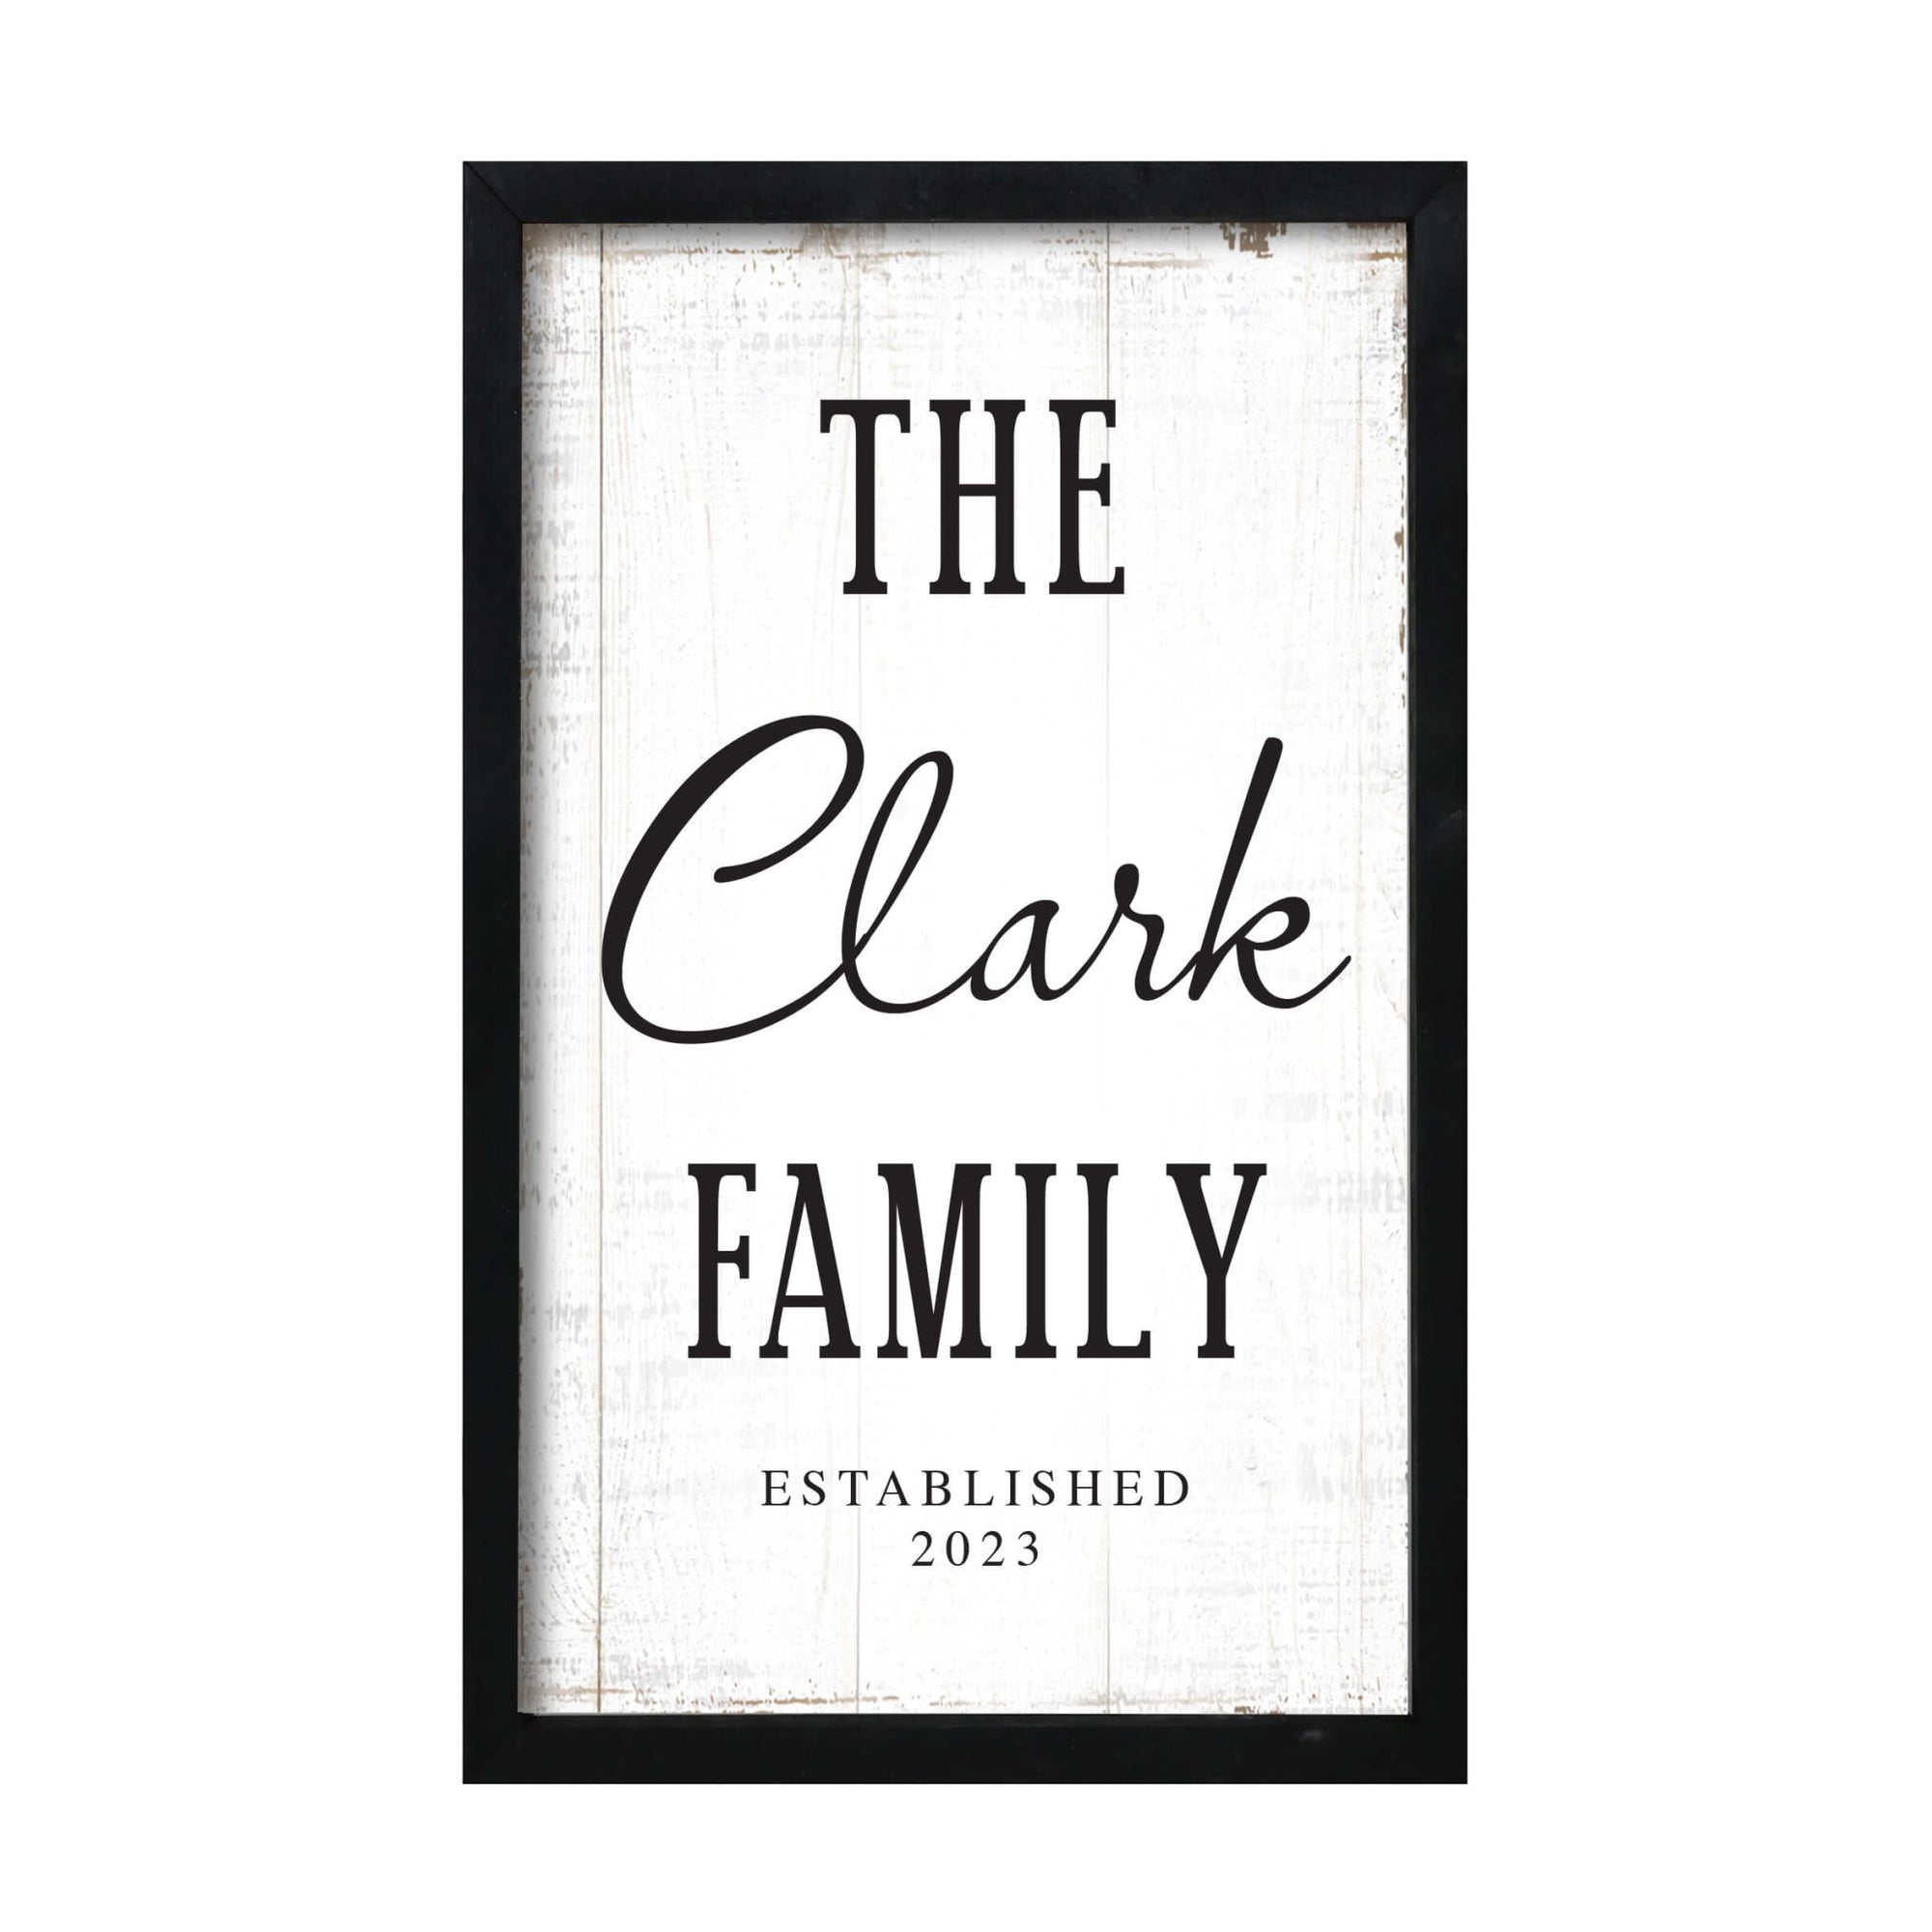 Personalized Family Wall Hanging Framed Shadow Box For Home Décor - The Clark Family - LifeSong Milestones